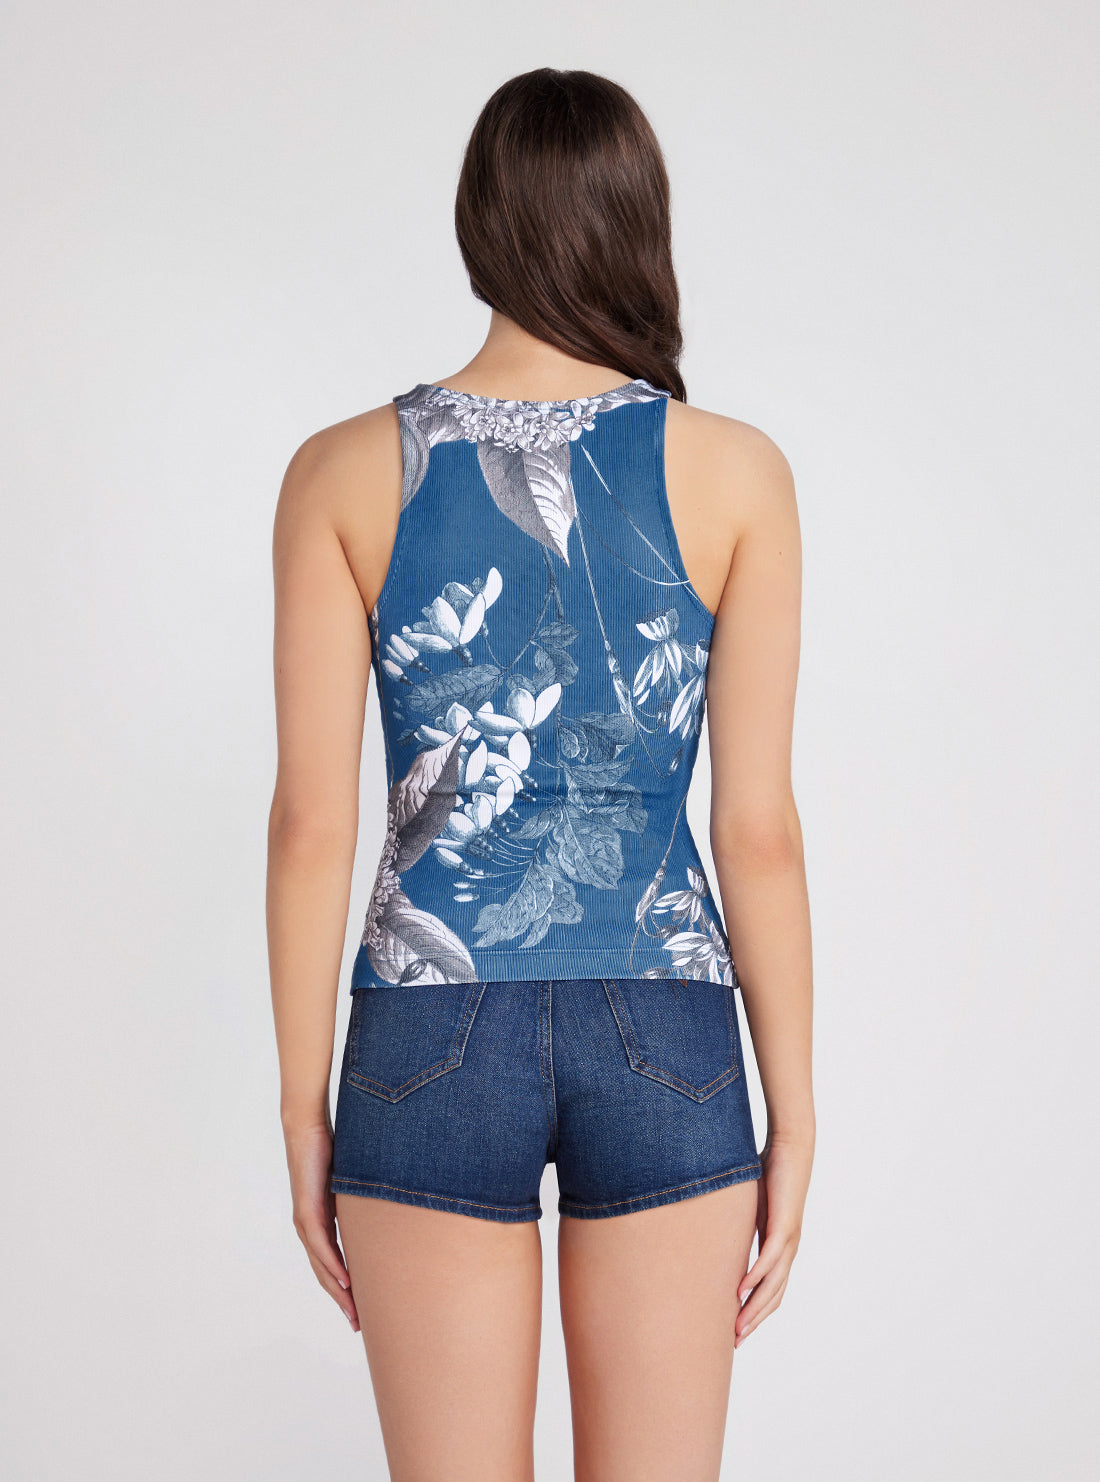 GUESS Blue Floral Sleeveless Guendalina Singlet Top back view